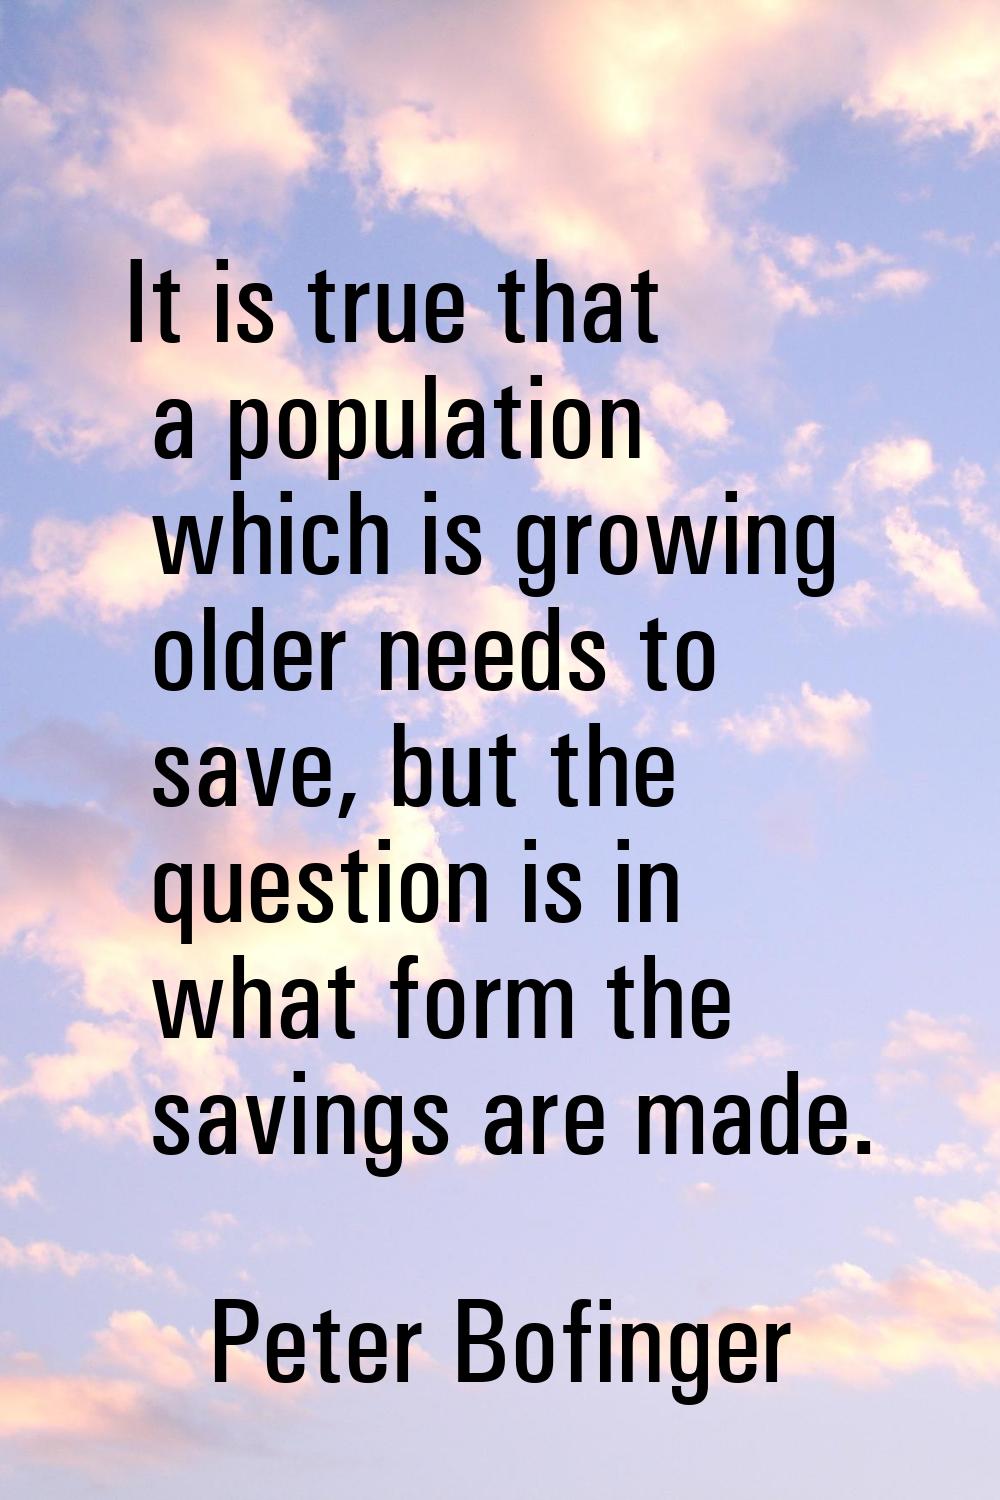 It is true that a population which is growing older needs to save, but the question is in what form